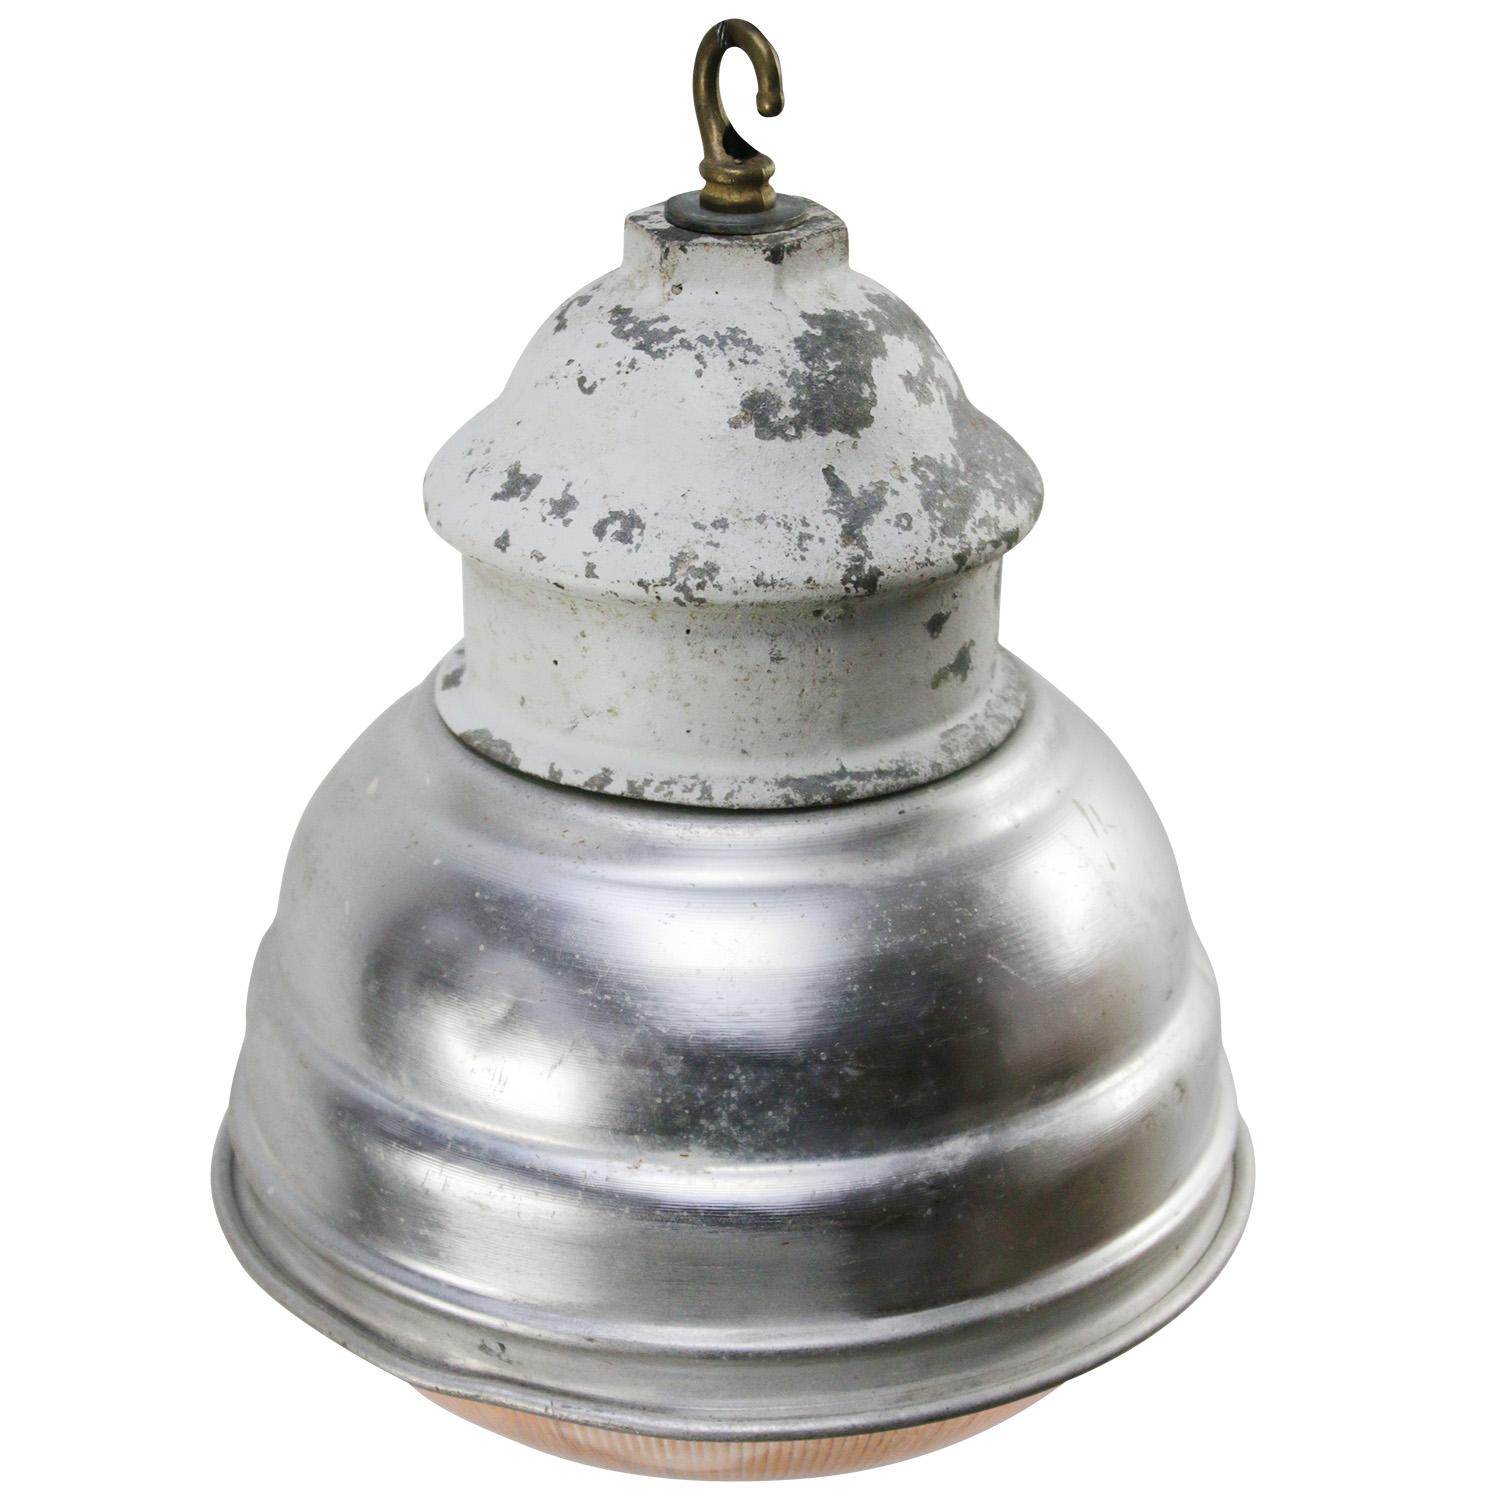 Industrial pendant lamp by Holophane Paris
Grey metal shade with clear striped / holophane glass
Brass top

weight 1.90 kg / 4.2 lb

Priced per individual item. All lamps have been made suitable by international standards for incandescent light